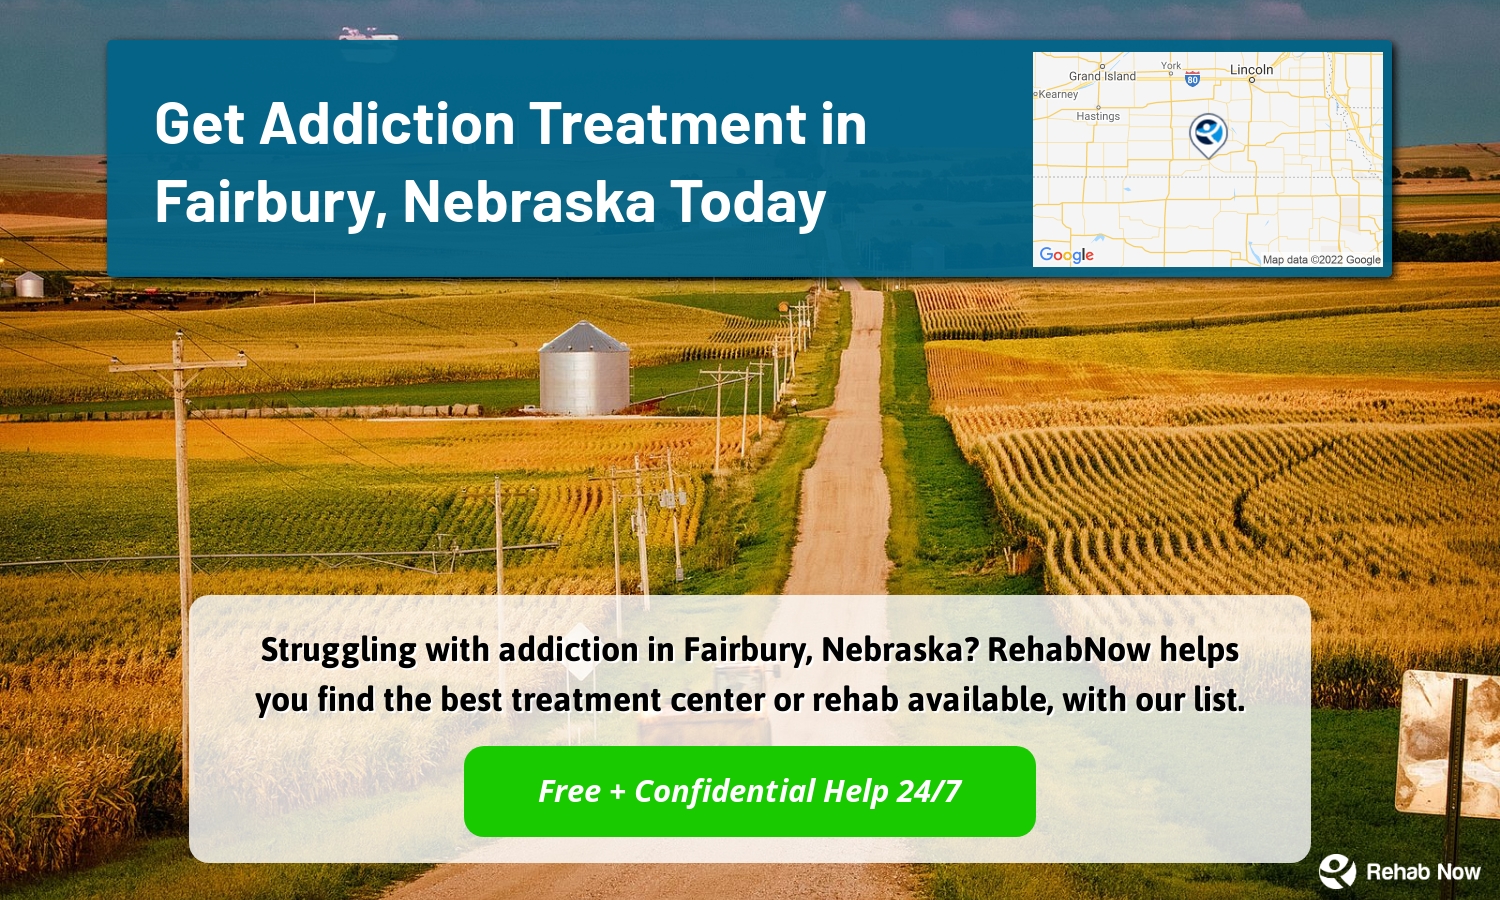 Struggling with addiction in Fairbury, Nebraska? RehabNow helps you find the best treatment center or rehab available, with our list.